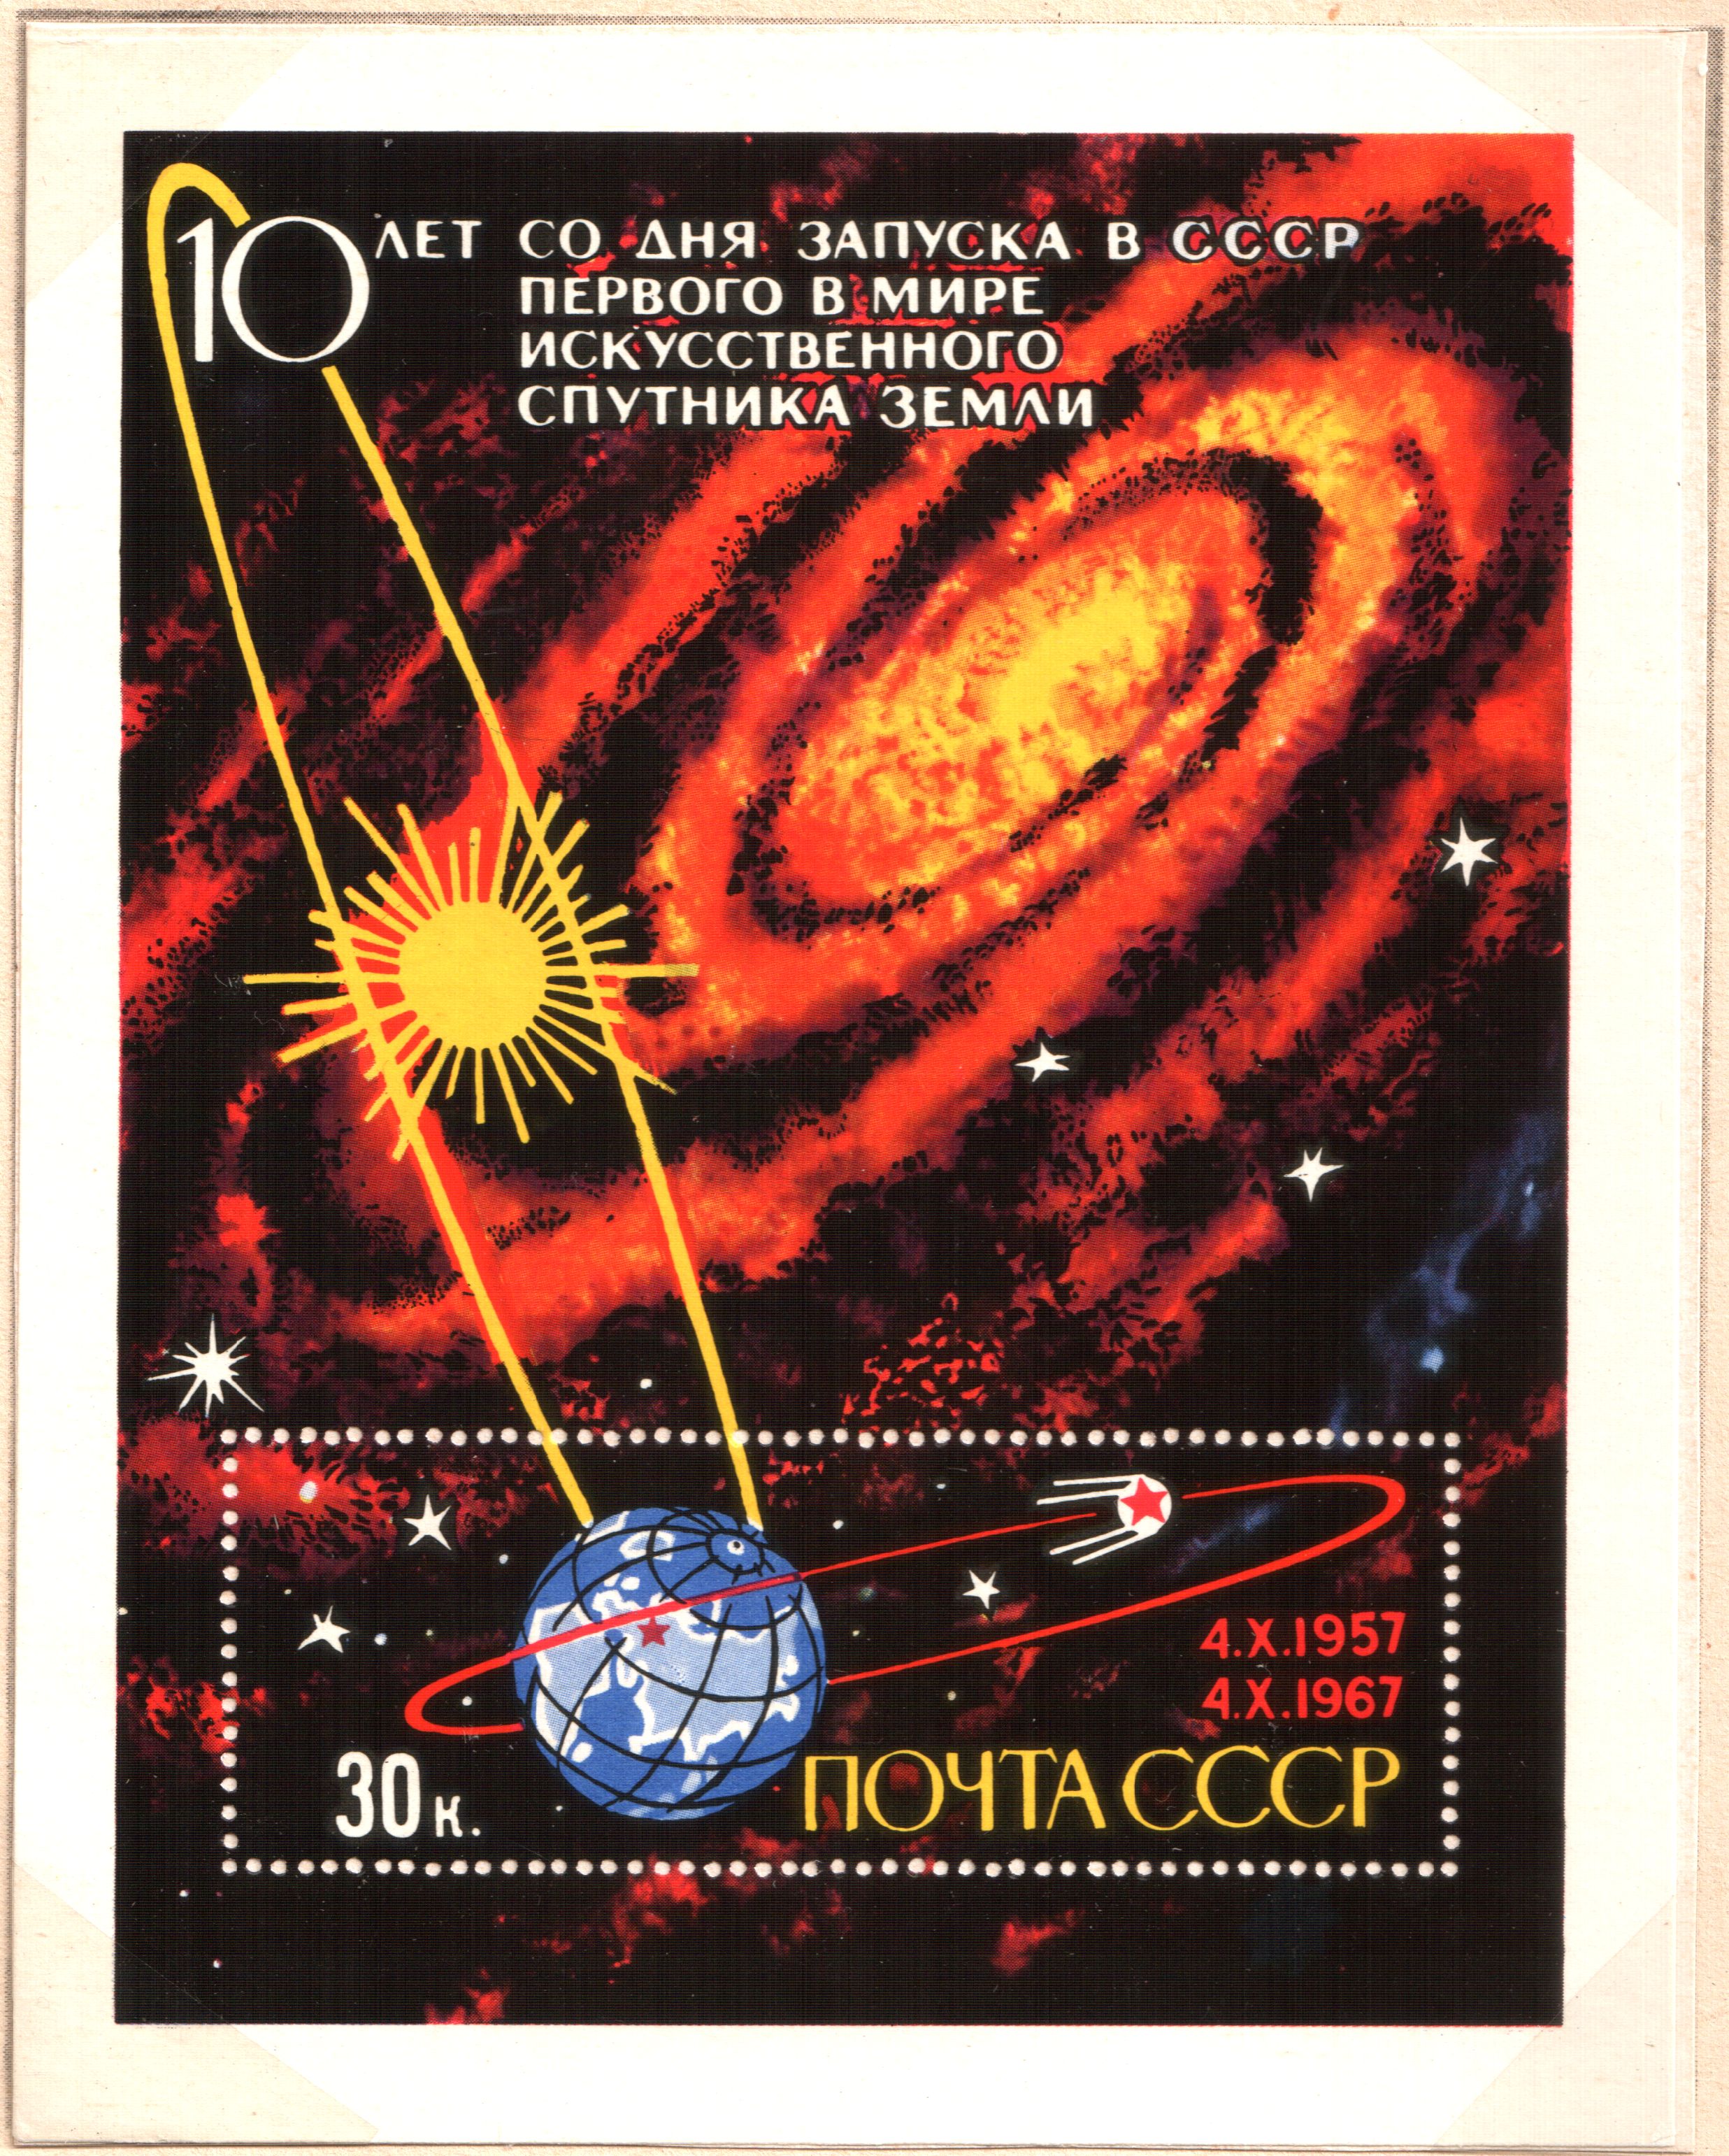 USSR stamp depicting Sputnik 1 orbiting the Earth, the Earth orbiting the Sun and the Sun orbiting the center of the Milky Way galaxy.